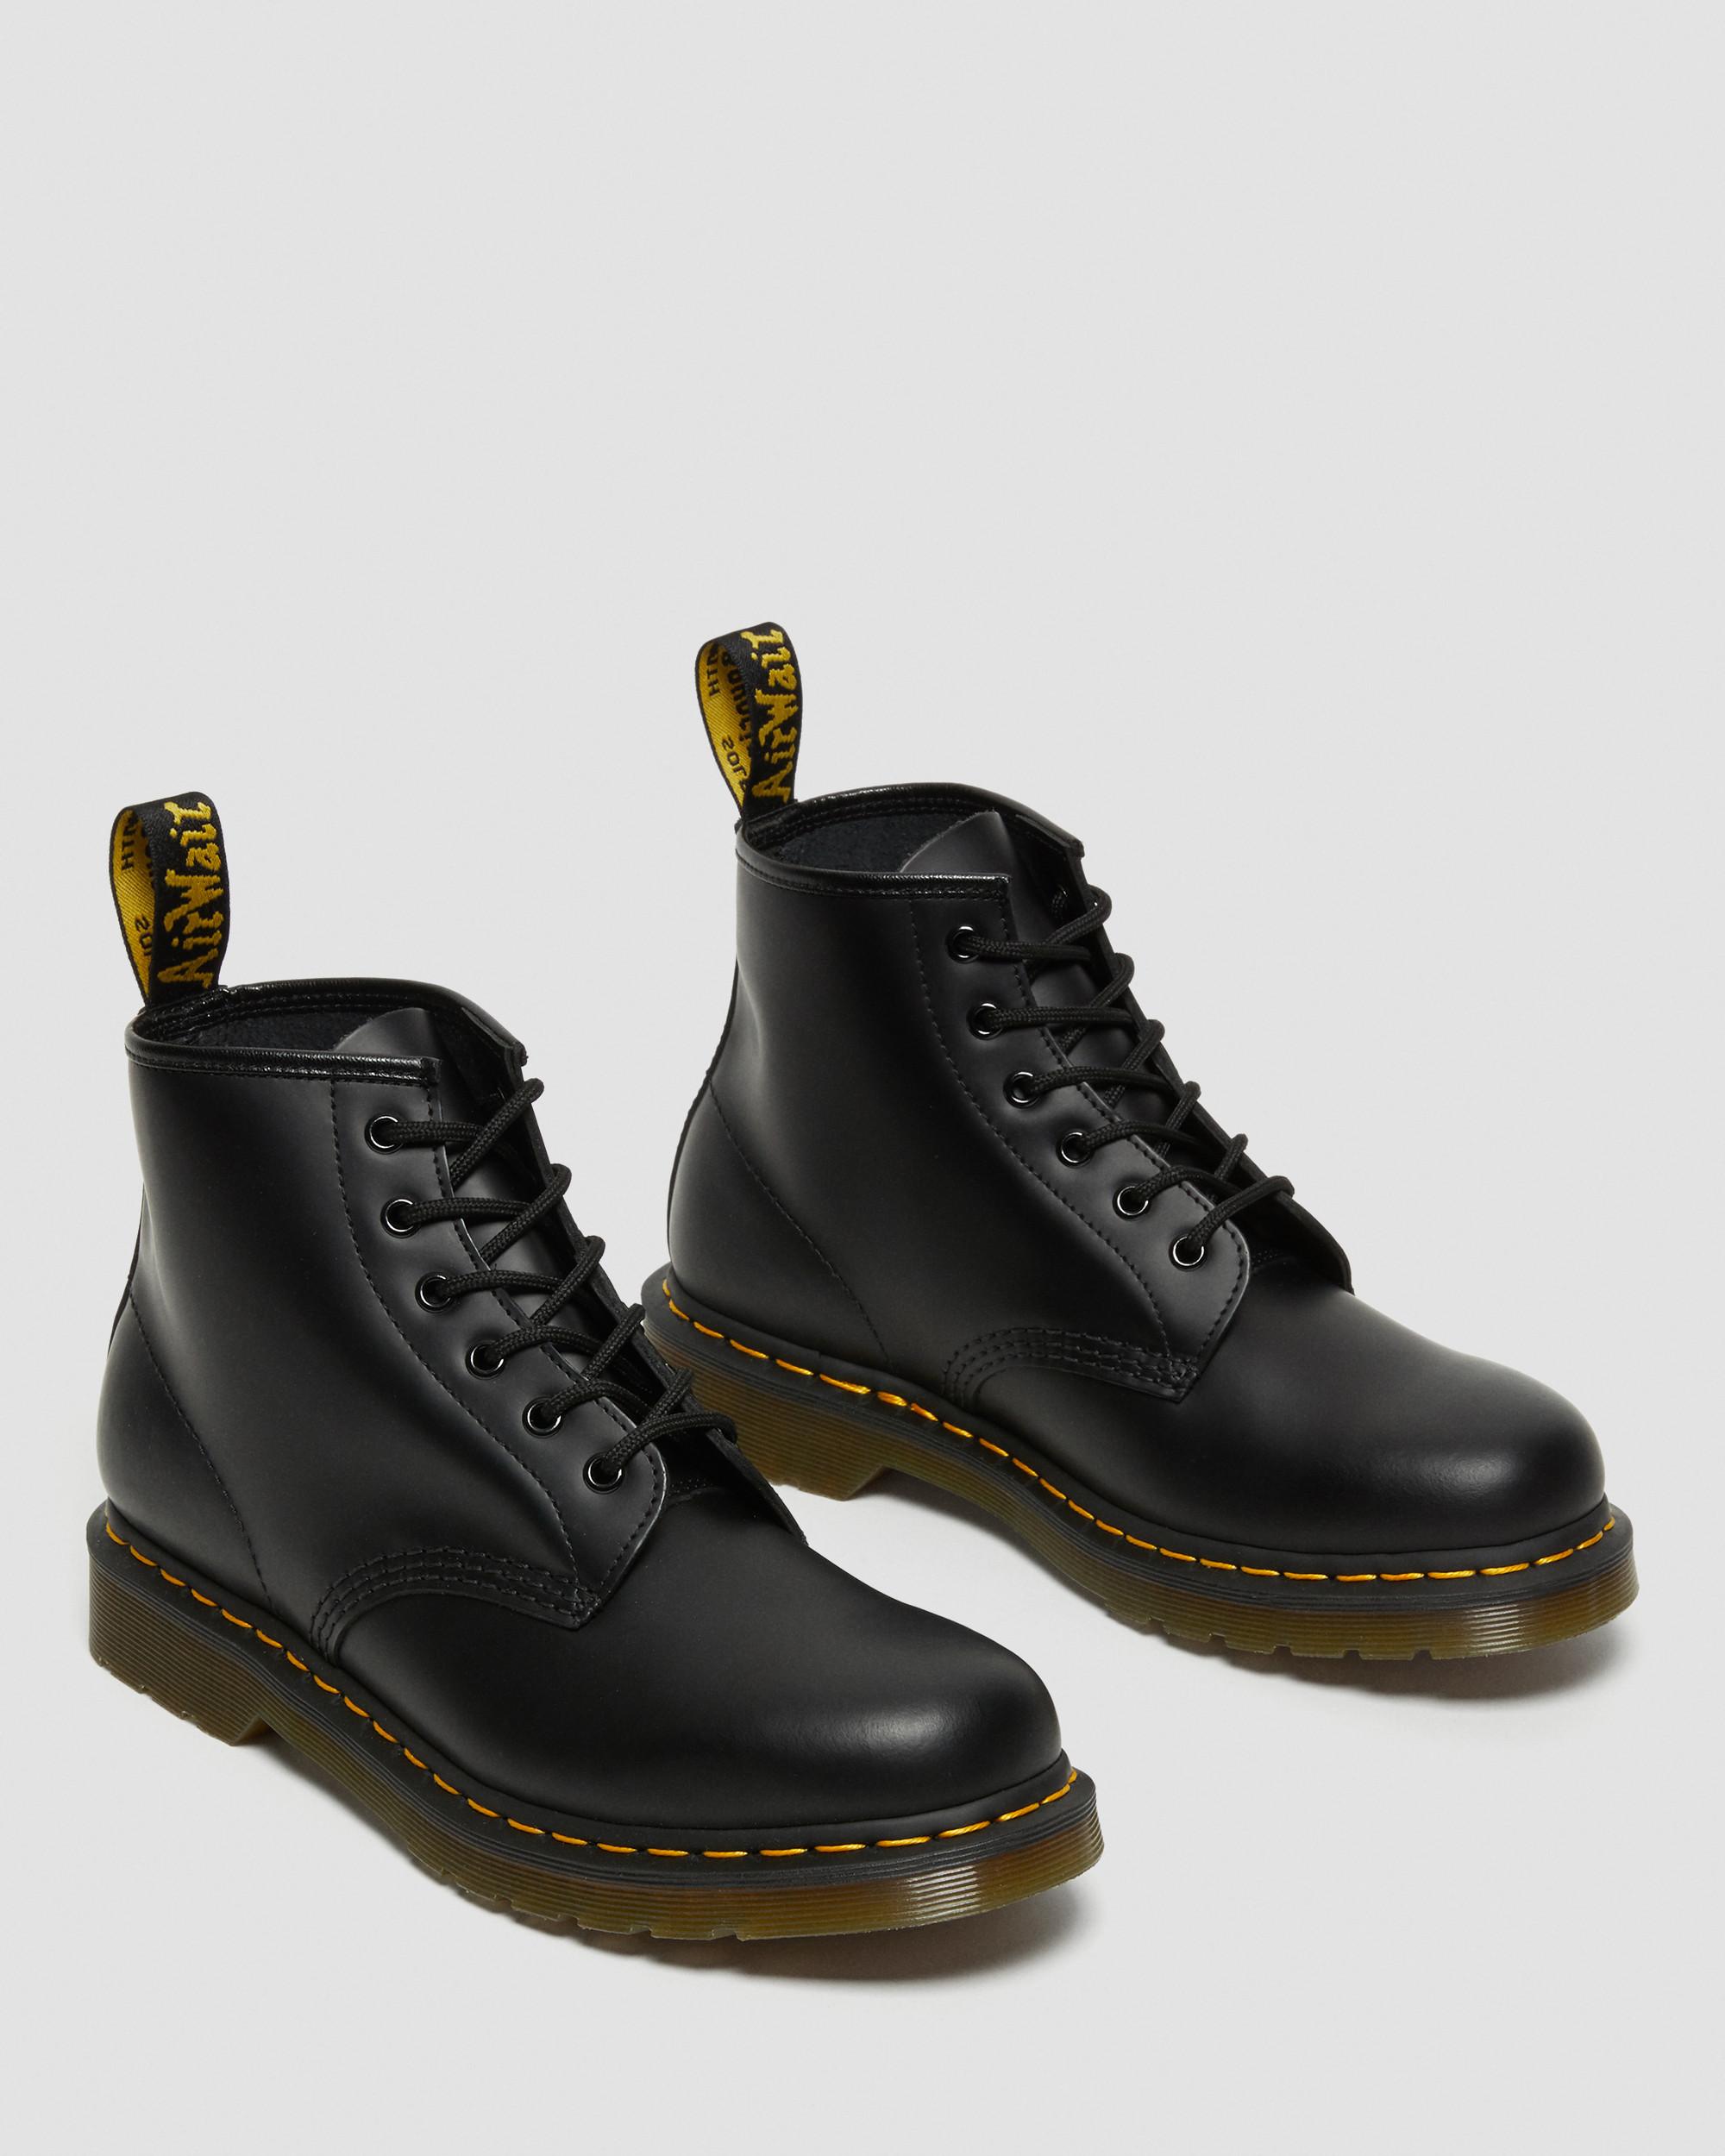 Boots basses 101 Stitch en cuir SmoothBoots basses 101 Yellow Stitch en cuir Smooth Dr. Martens